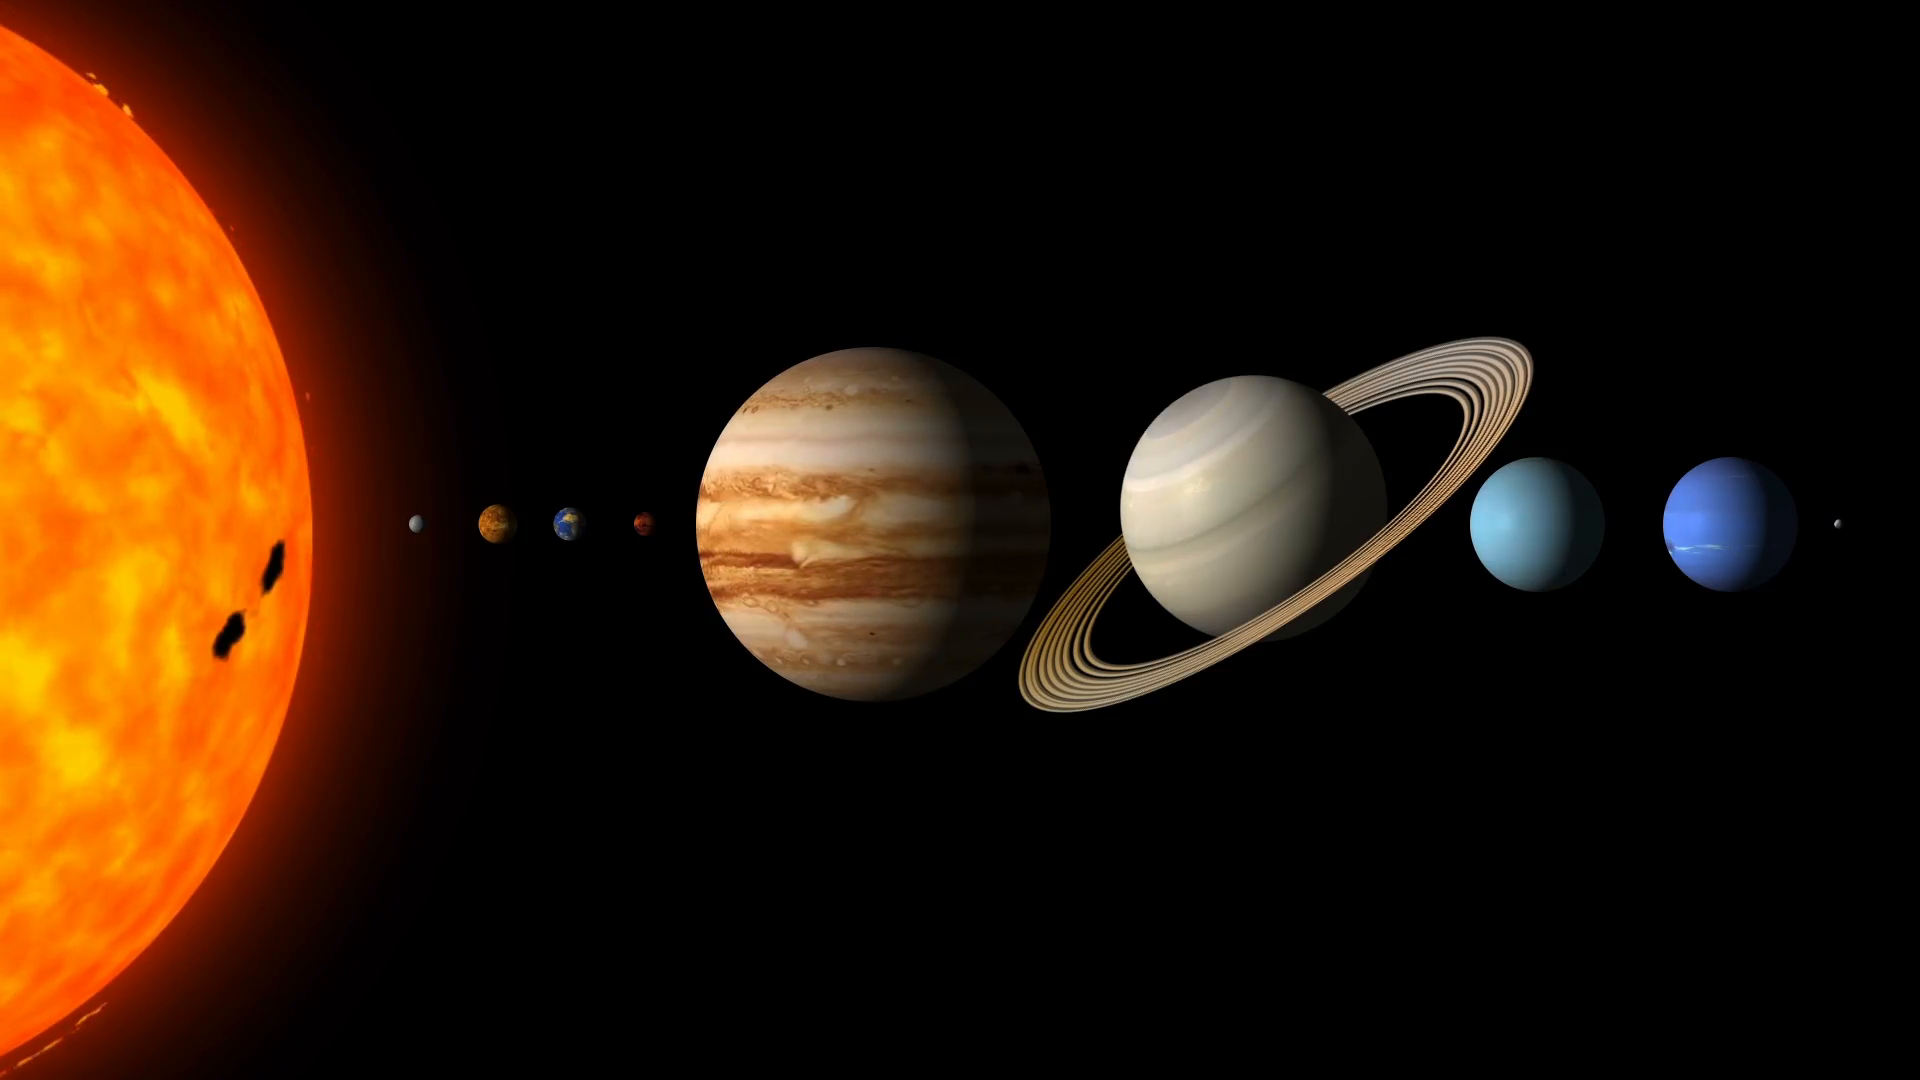 The Planets of the Solar System By Order Motion Background - Videoblocks